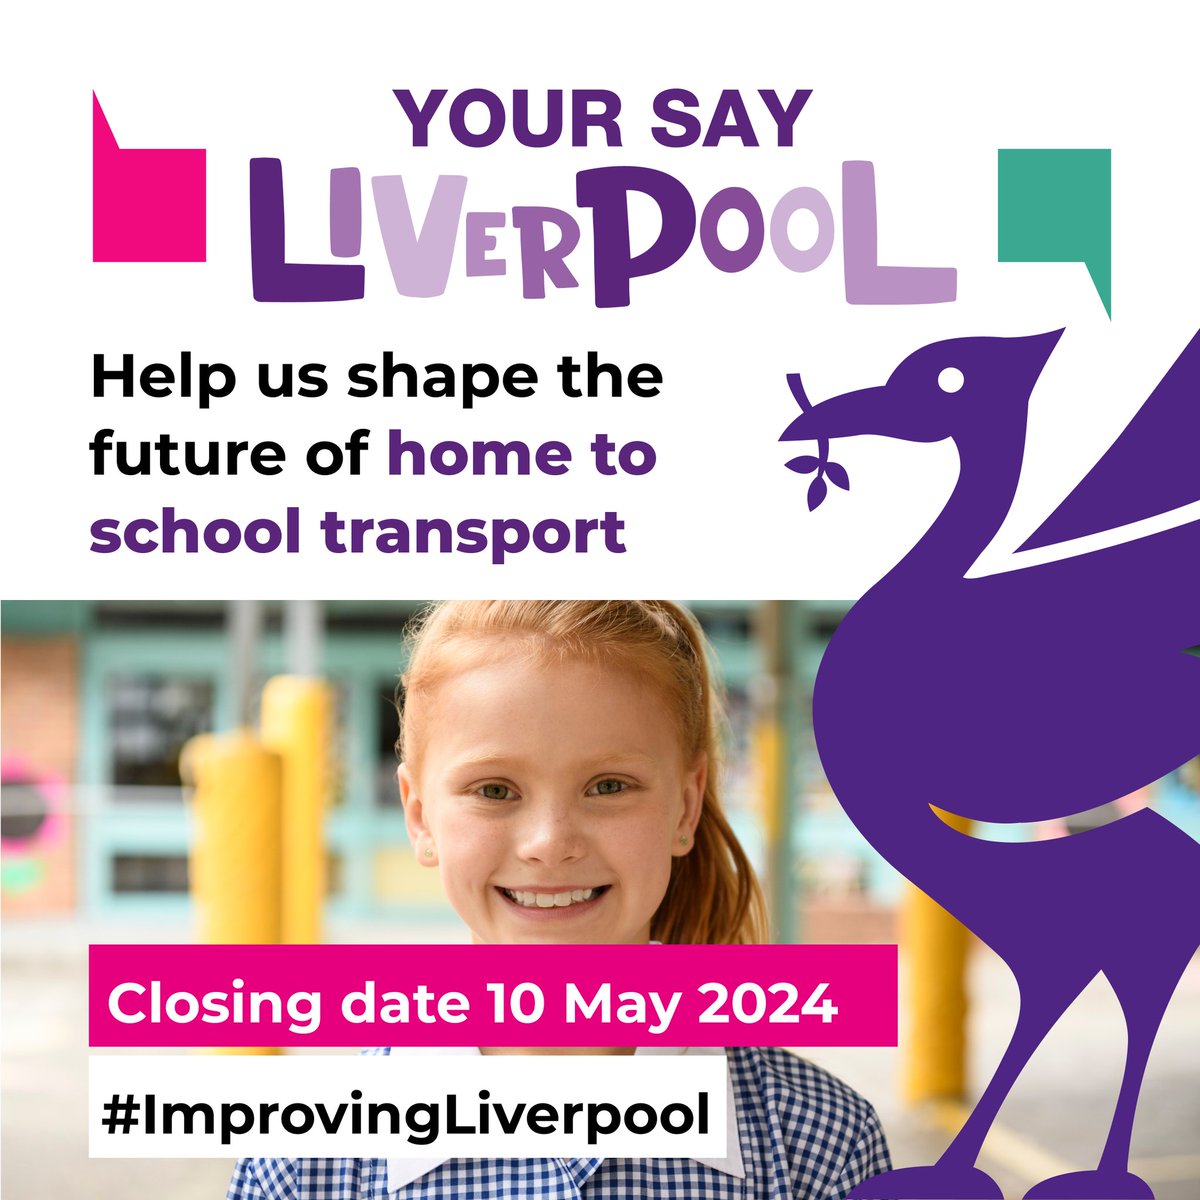 #CONSULTATION | We're reviewing our Home to School Transport policy. Have your say by 10 May. Click the link for more info. liverpool.gov.uk/council/consul…